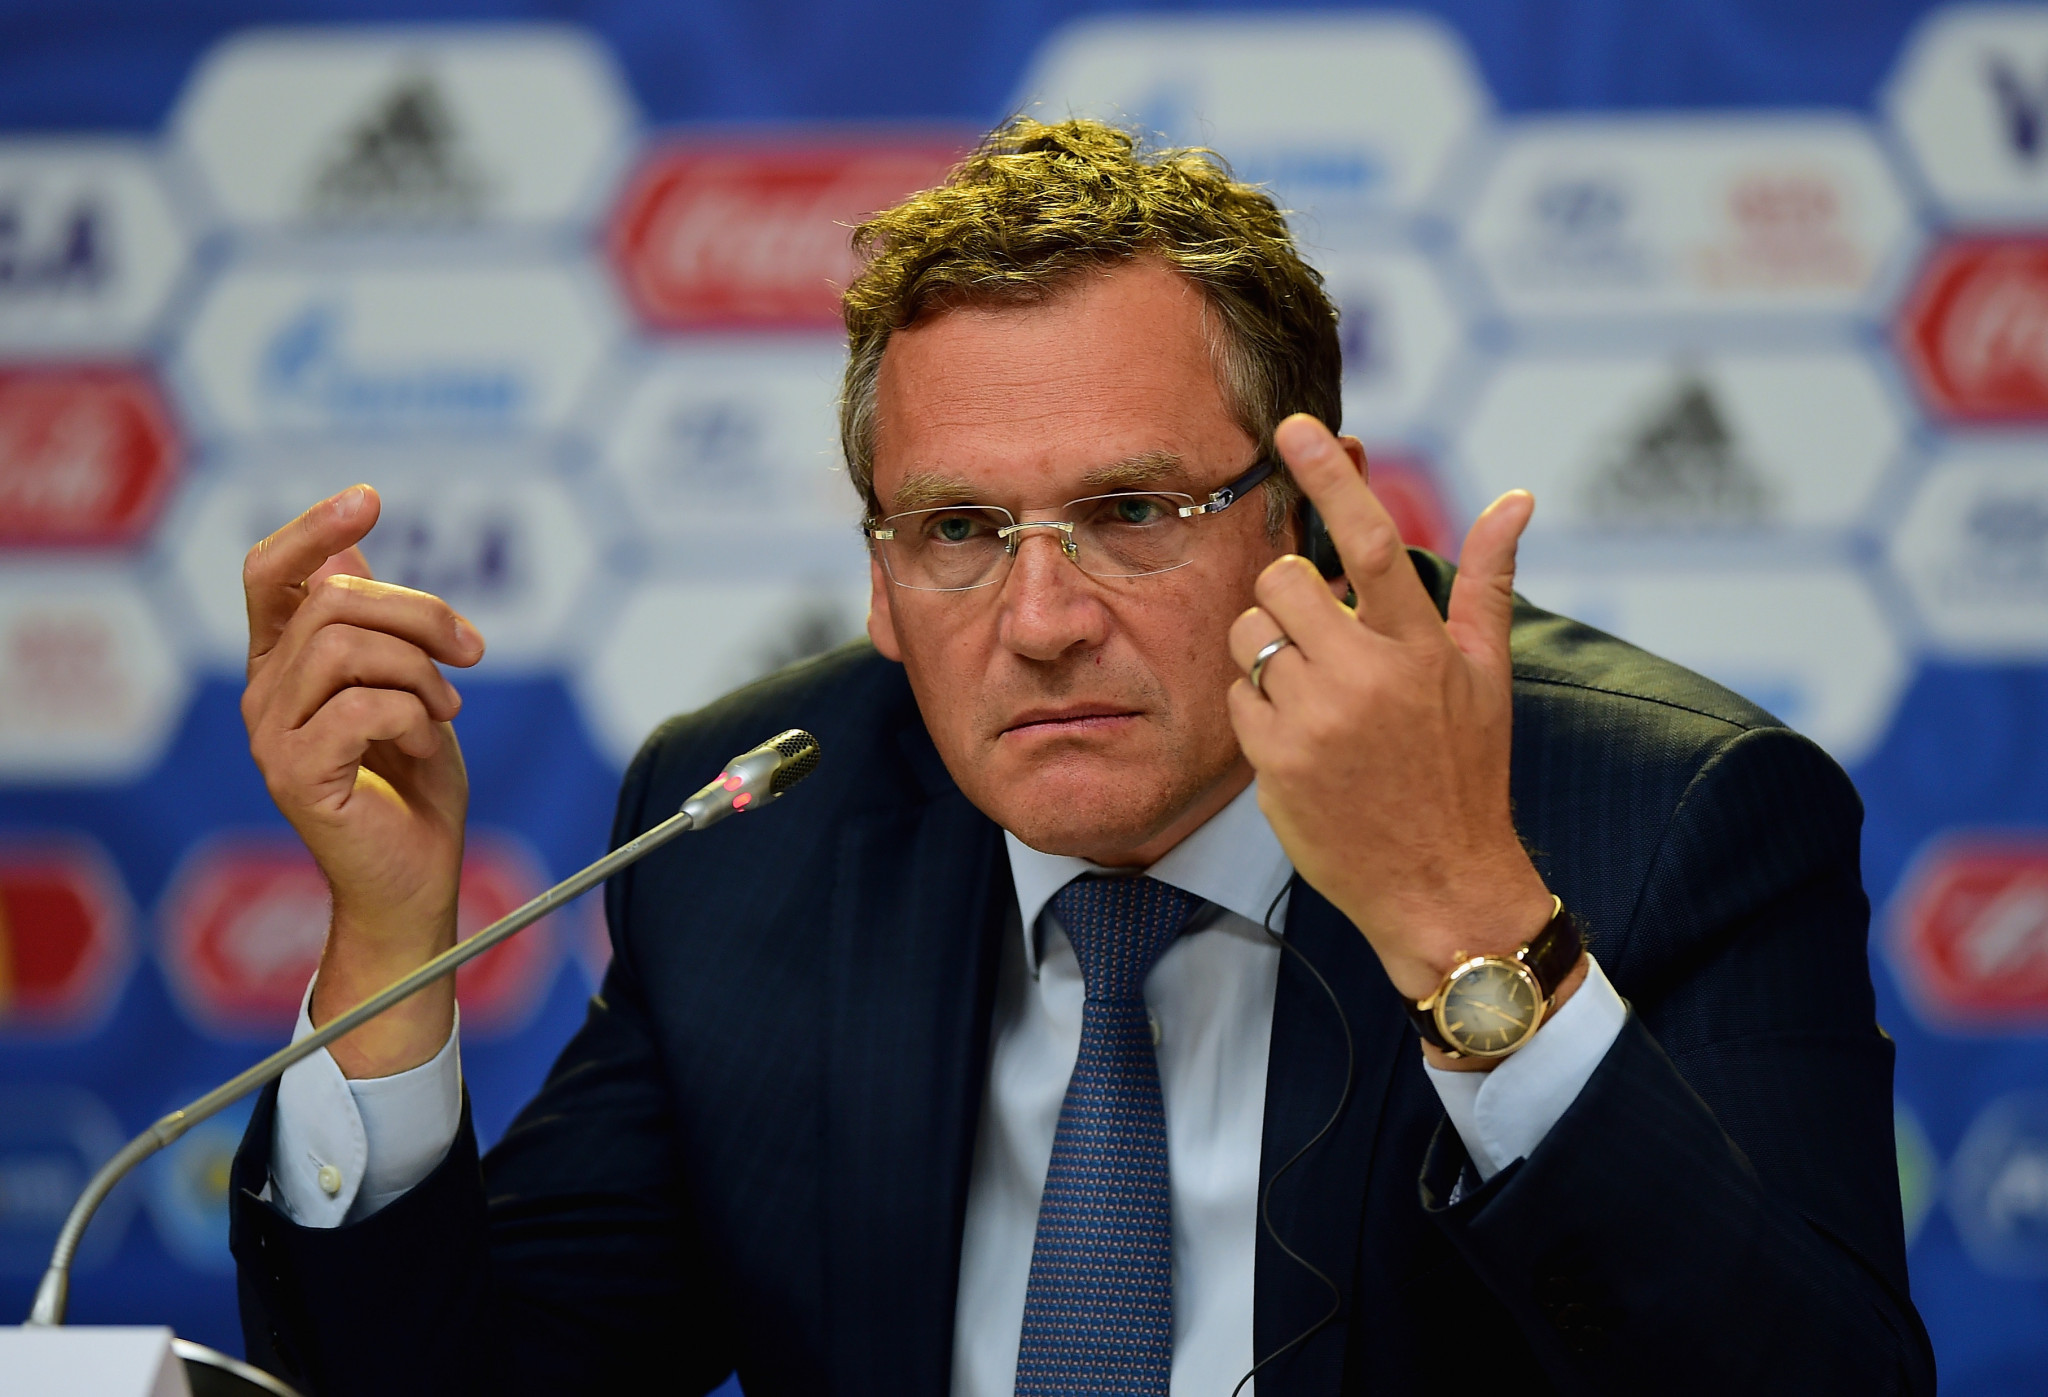 Jérôme Valcke spent $11.7 million in less than three years on private jets the Court of Arbitration for Sport revealed in its judgement released last year when they turned down his appeal ©Getty Images